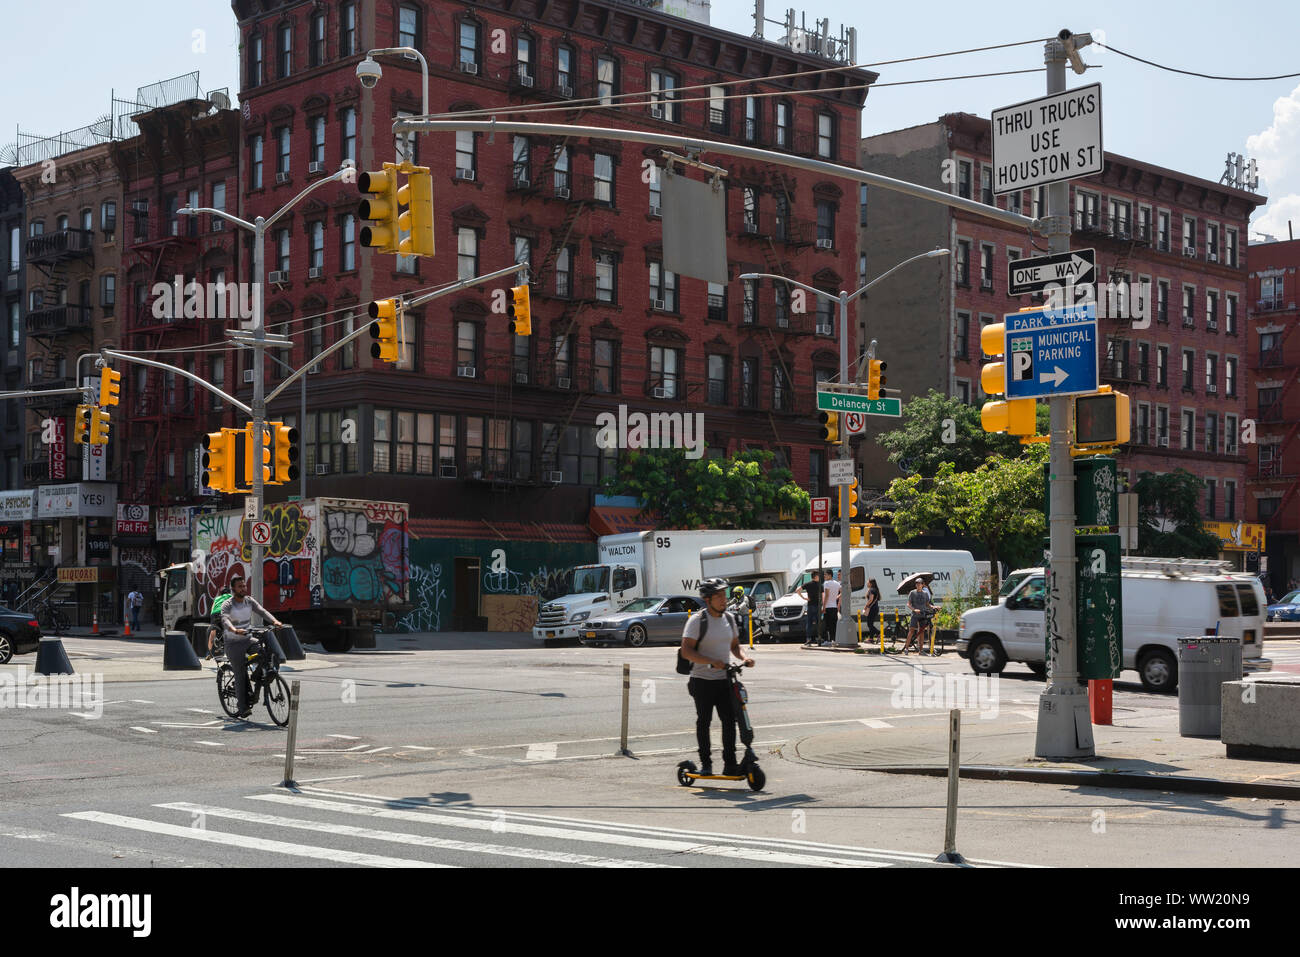 New York street scene, view in summer of people crossing Delancey Street in the Lower East Side of Manhattan, New York City, USA Stock Photo